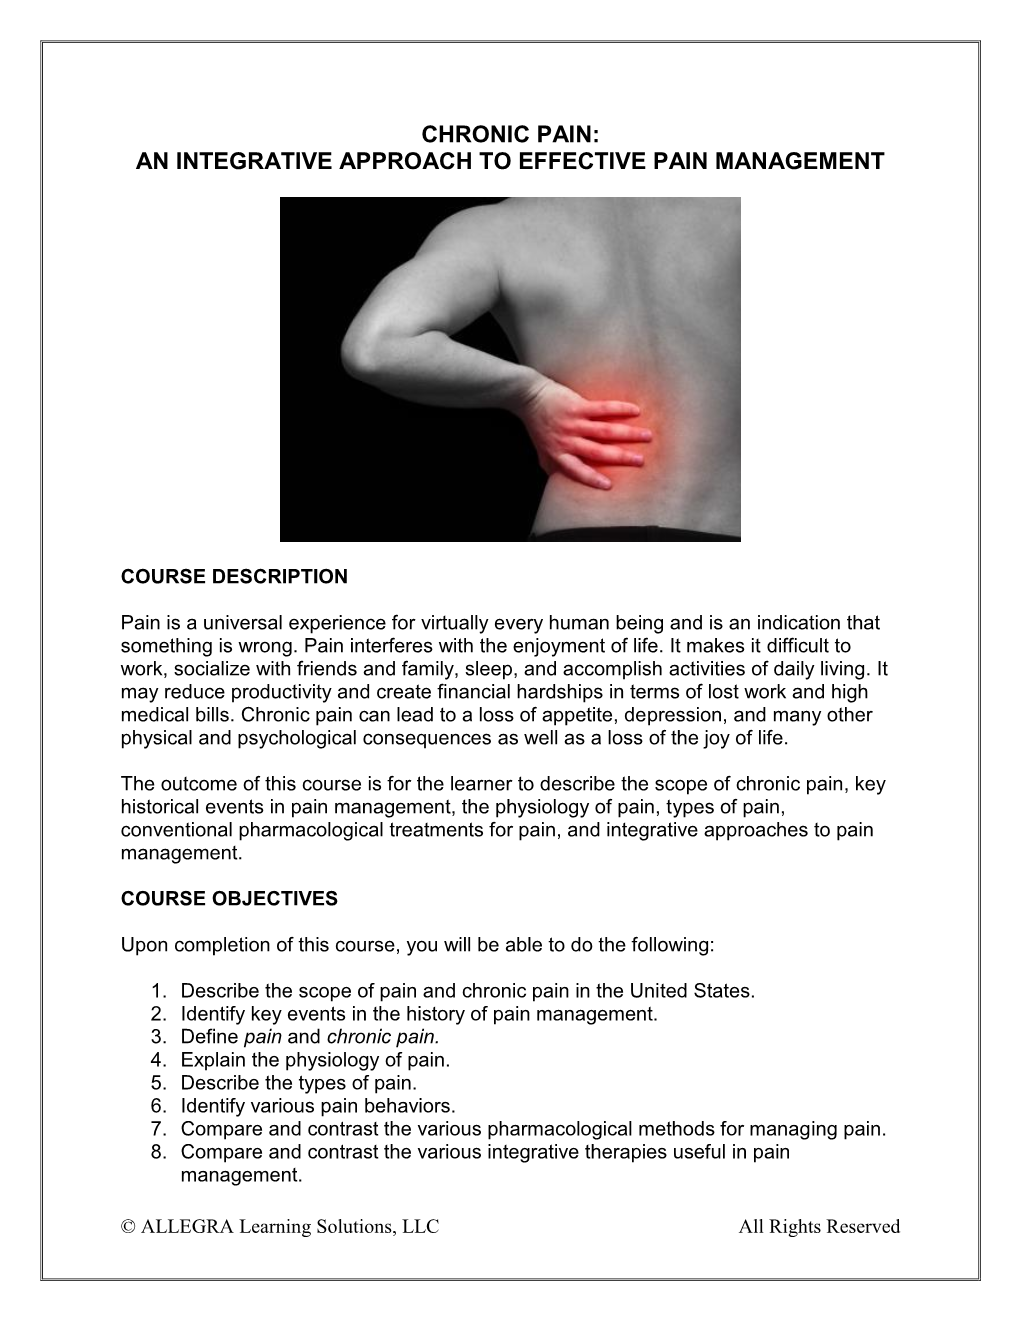 Chronic Pain: an Integrative Approach to Effective Pain Management